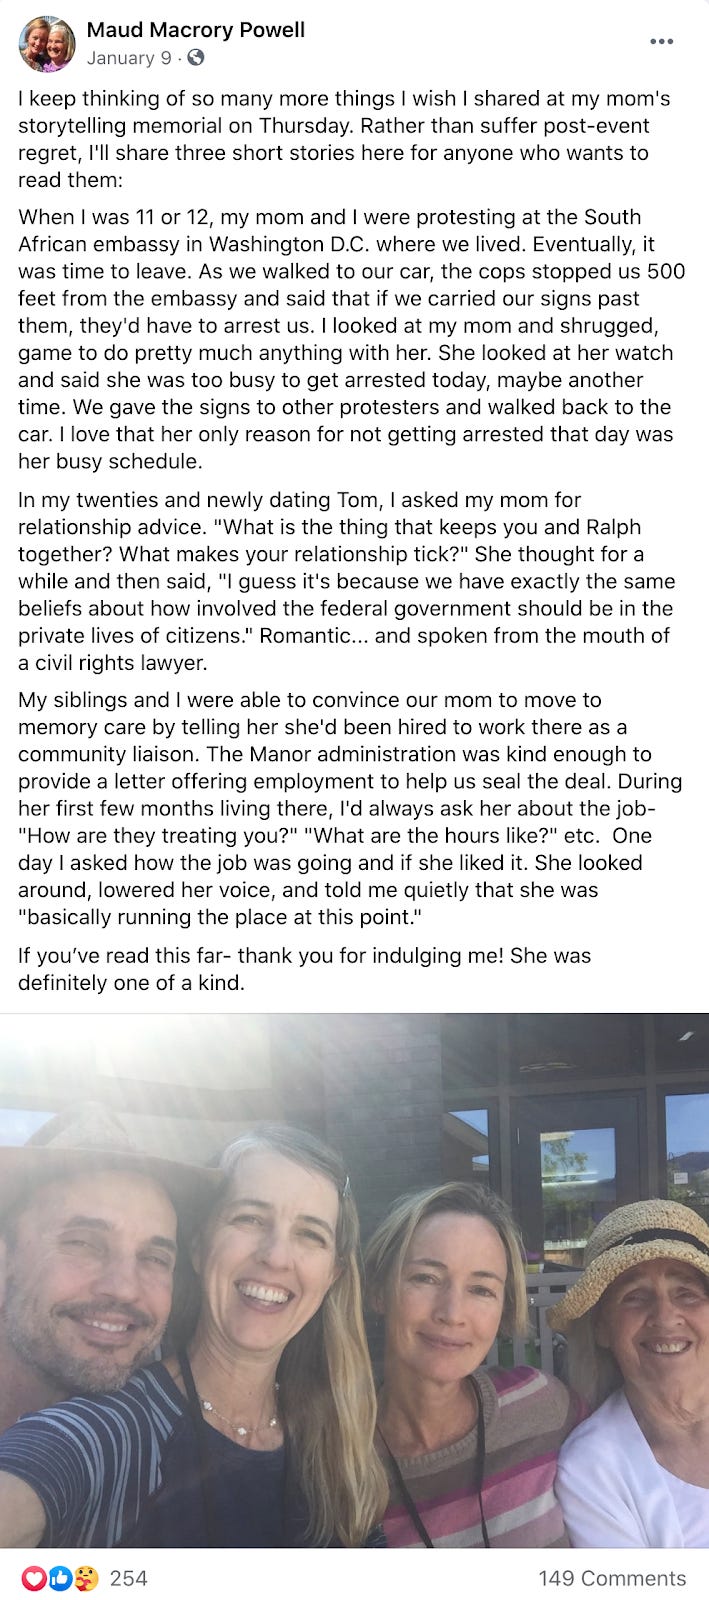 A screenshot of a Facebook post with several stories about Maud's mother, including one where she shares that she's "basically running the place" at her memory care facility, now.